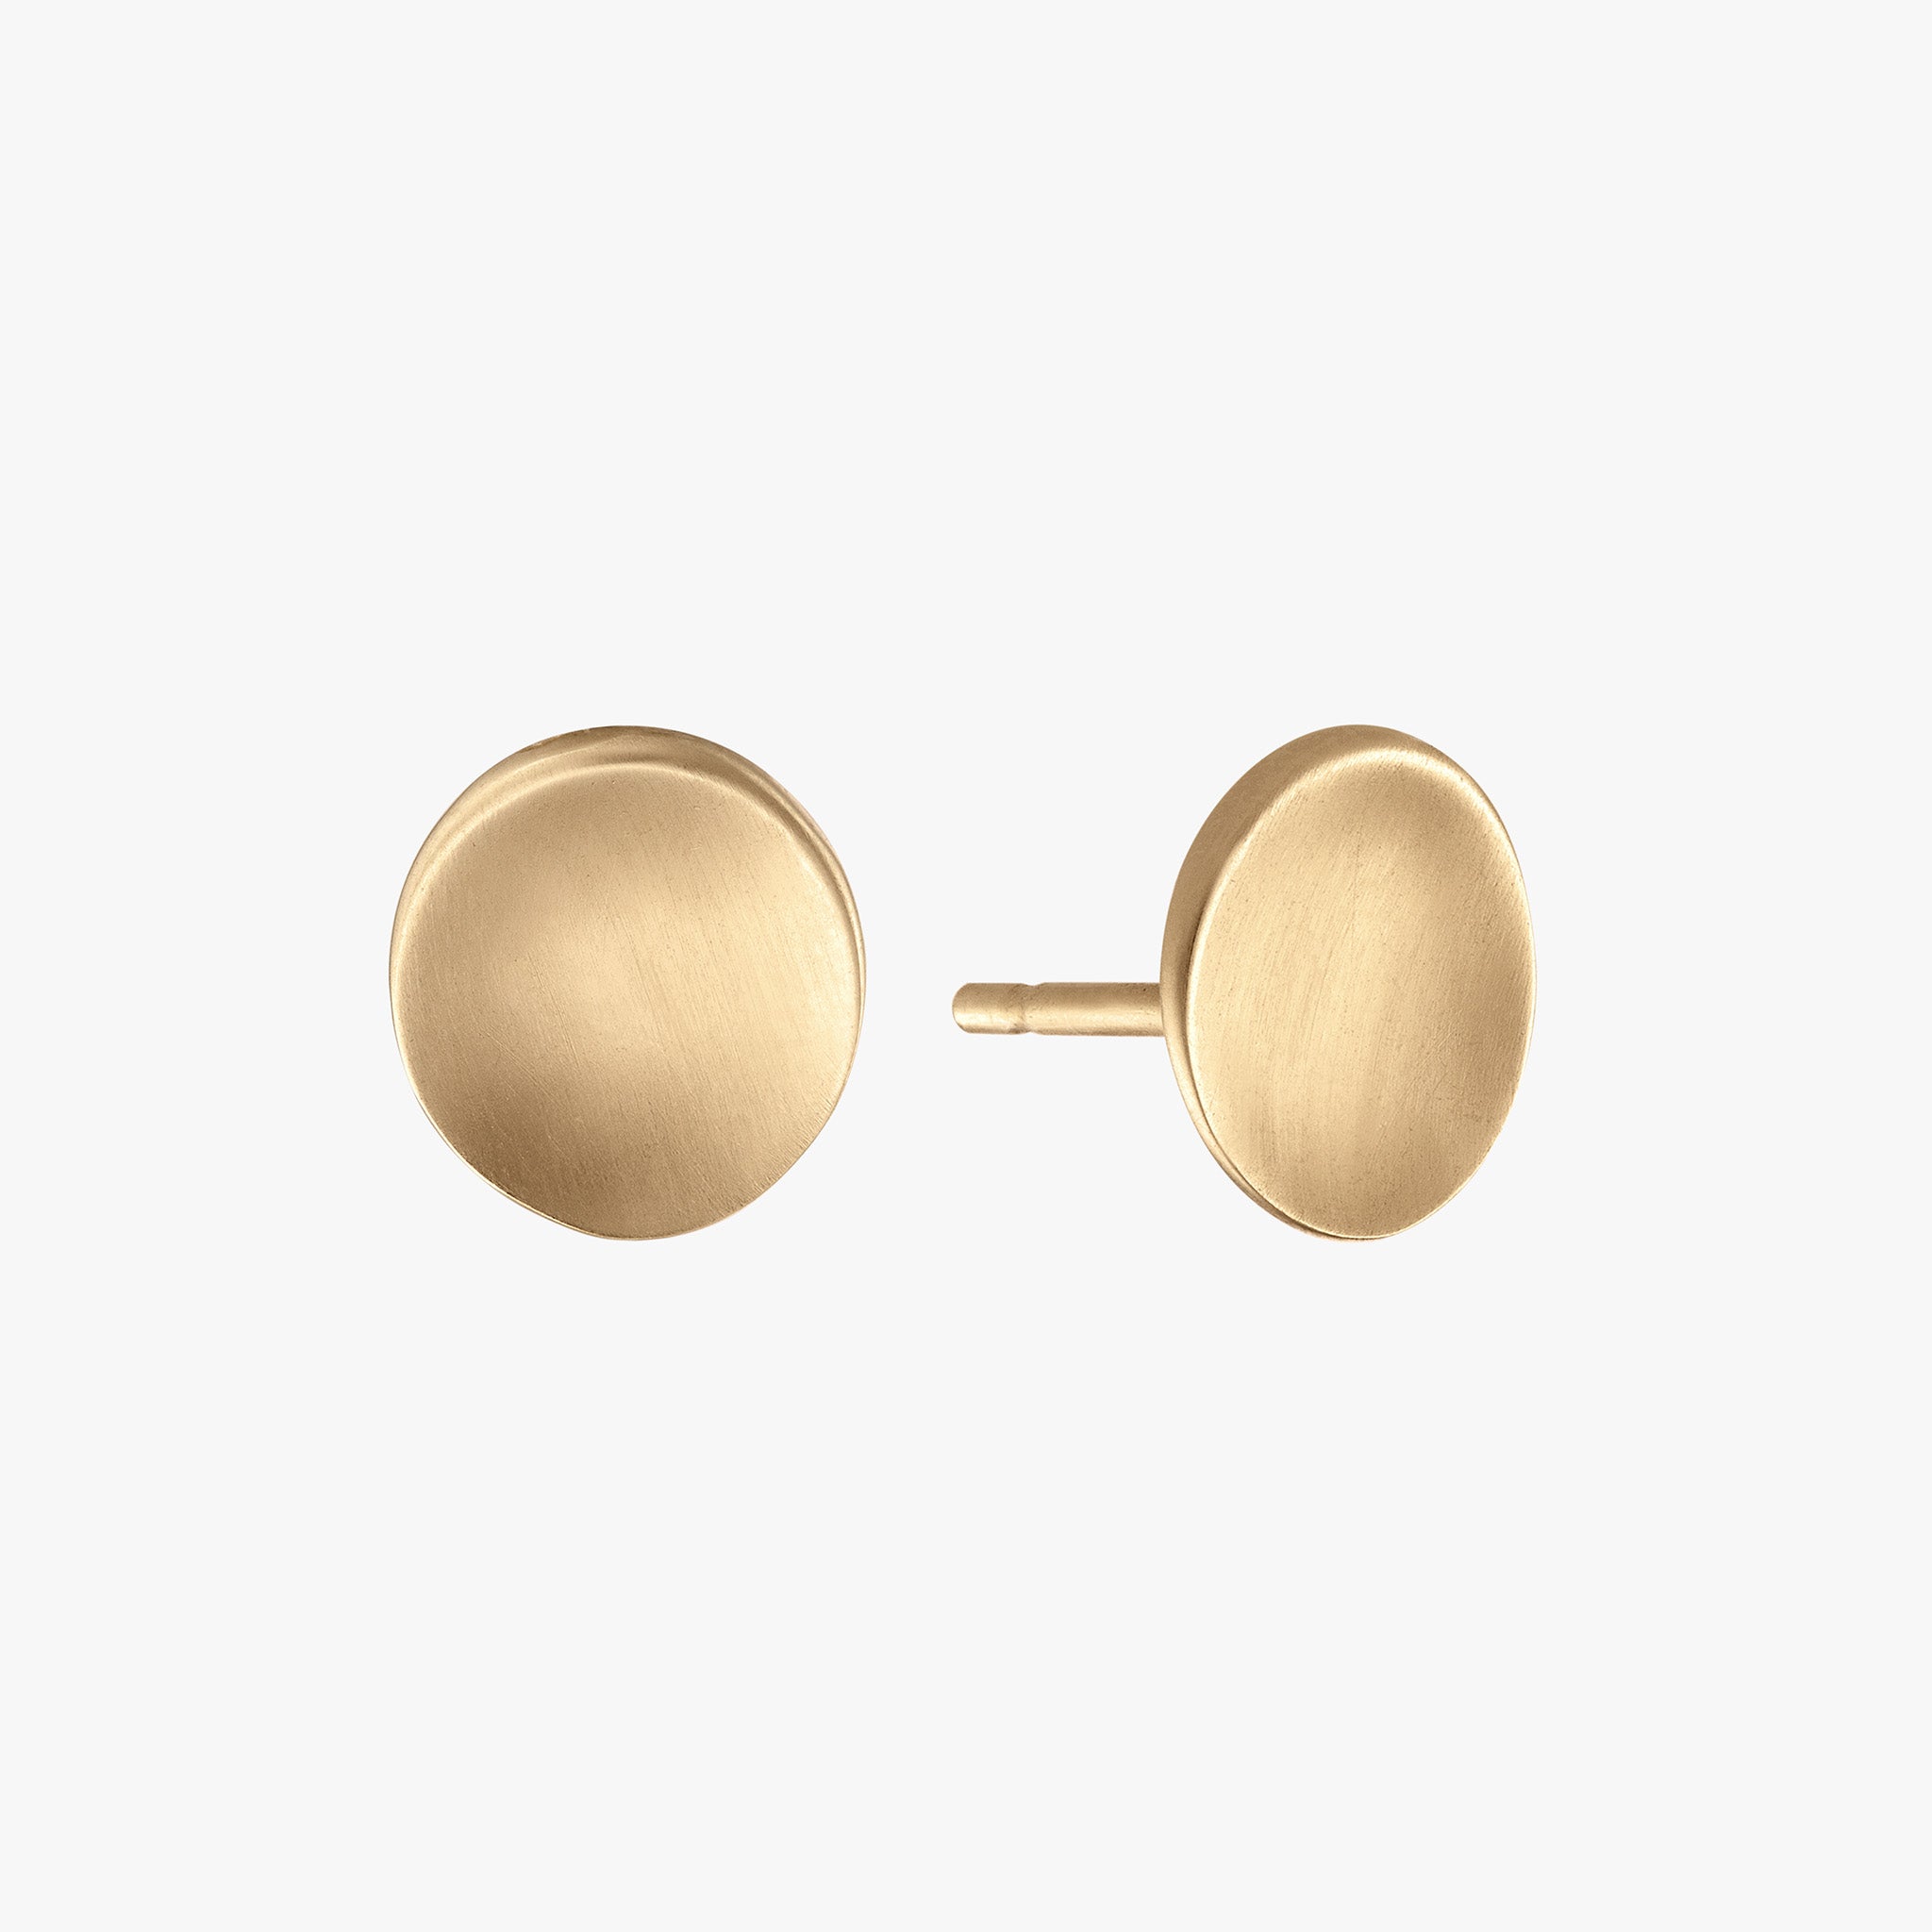 Buy Gold Stud Earrings, Round Shape Earrings, Yellow Gold Earrings, 14K  Earrings, Circle Earrings, Girls Studs, Handmade Jewelry, Gift for Her  Online in India - Etsy